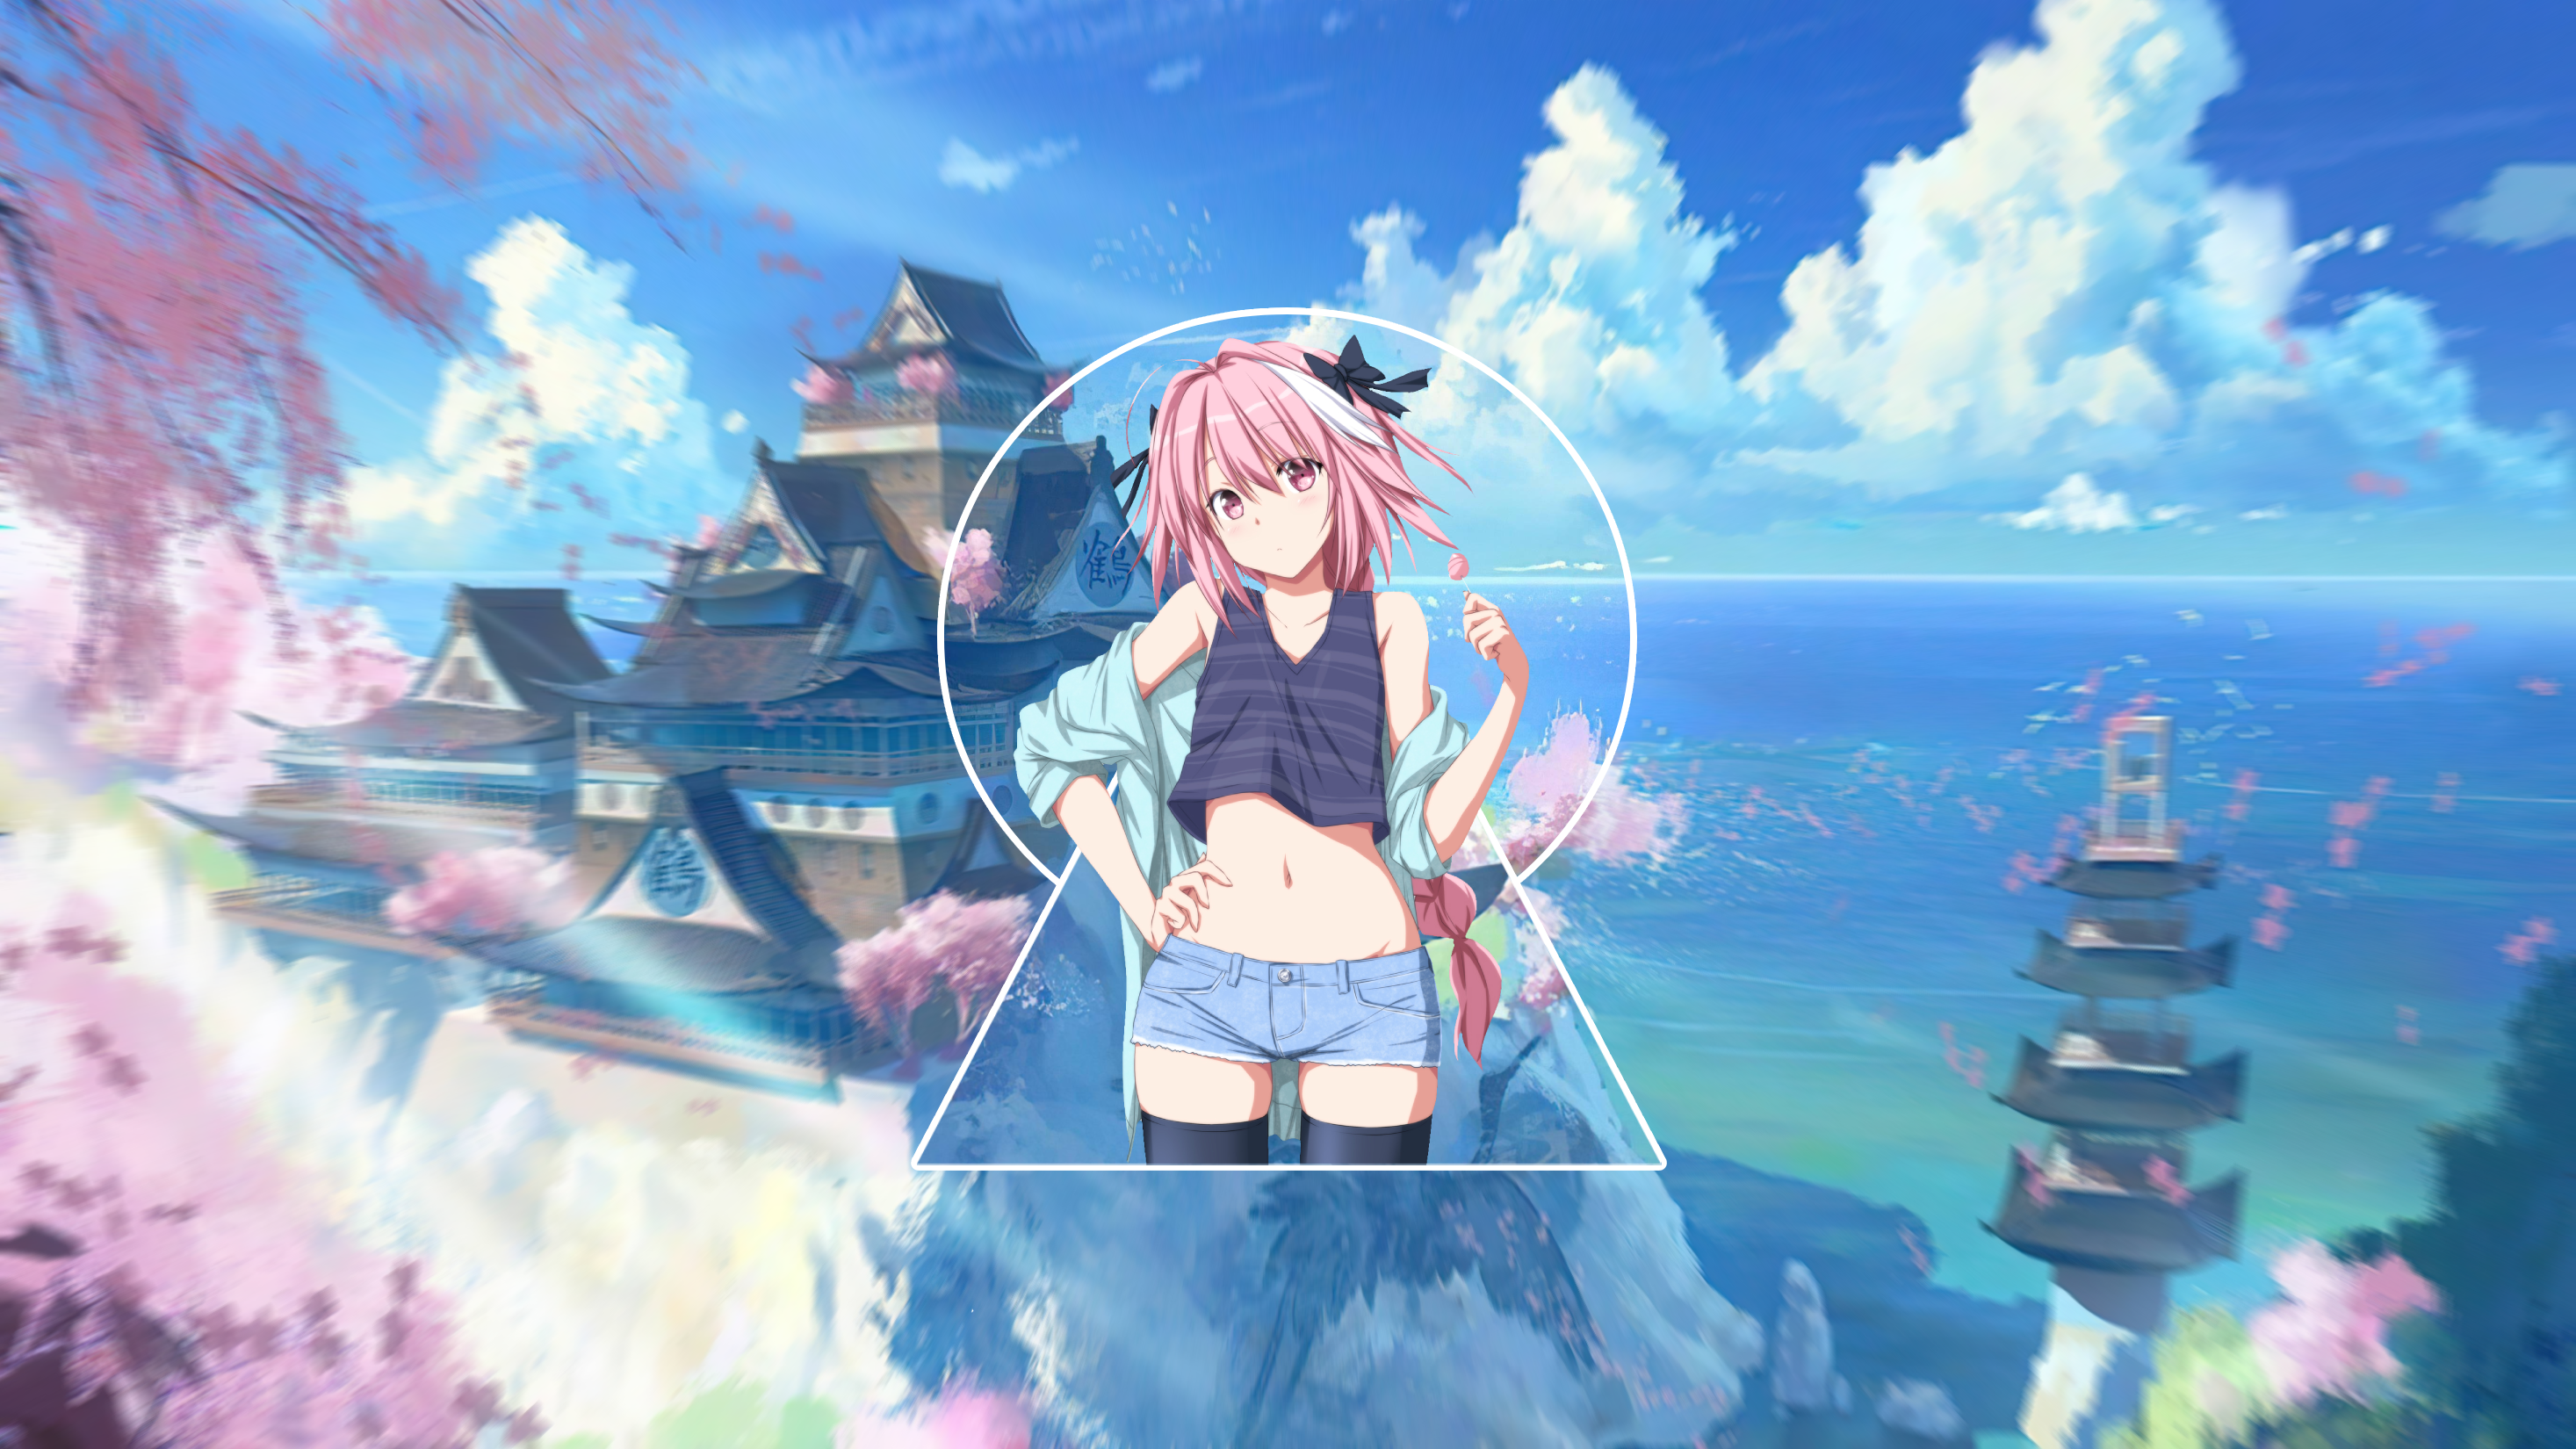 Astolfo Fate Apocrypha Picture In Picture Digital Fate Series Femboy 2933x1650